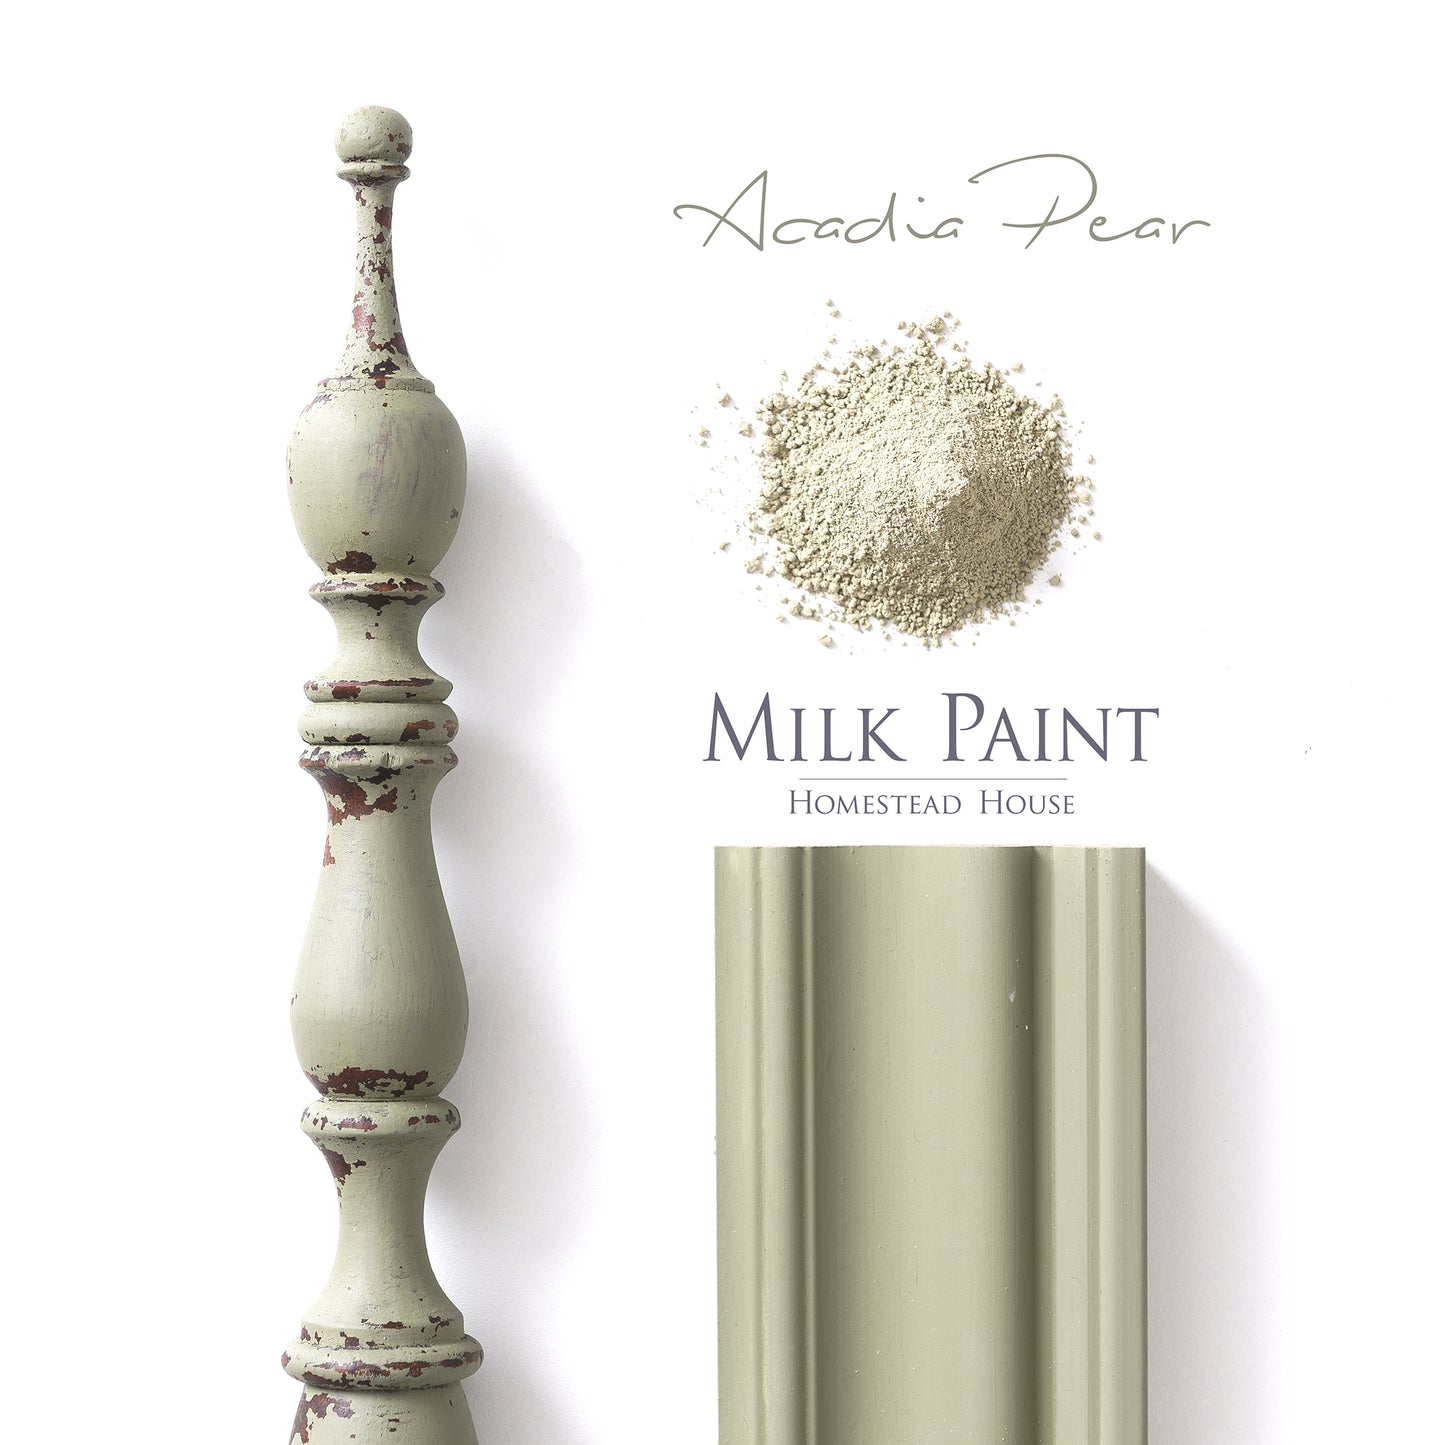 Acadia Pear Milk Paint from Homestead House in Powder Form and as finished colour.   |  homesteadhouse.ca